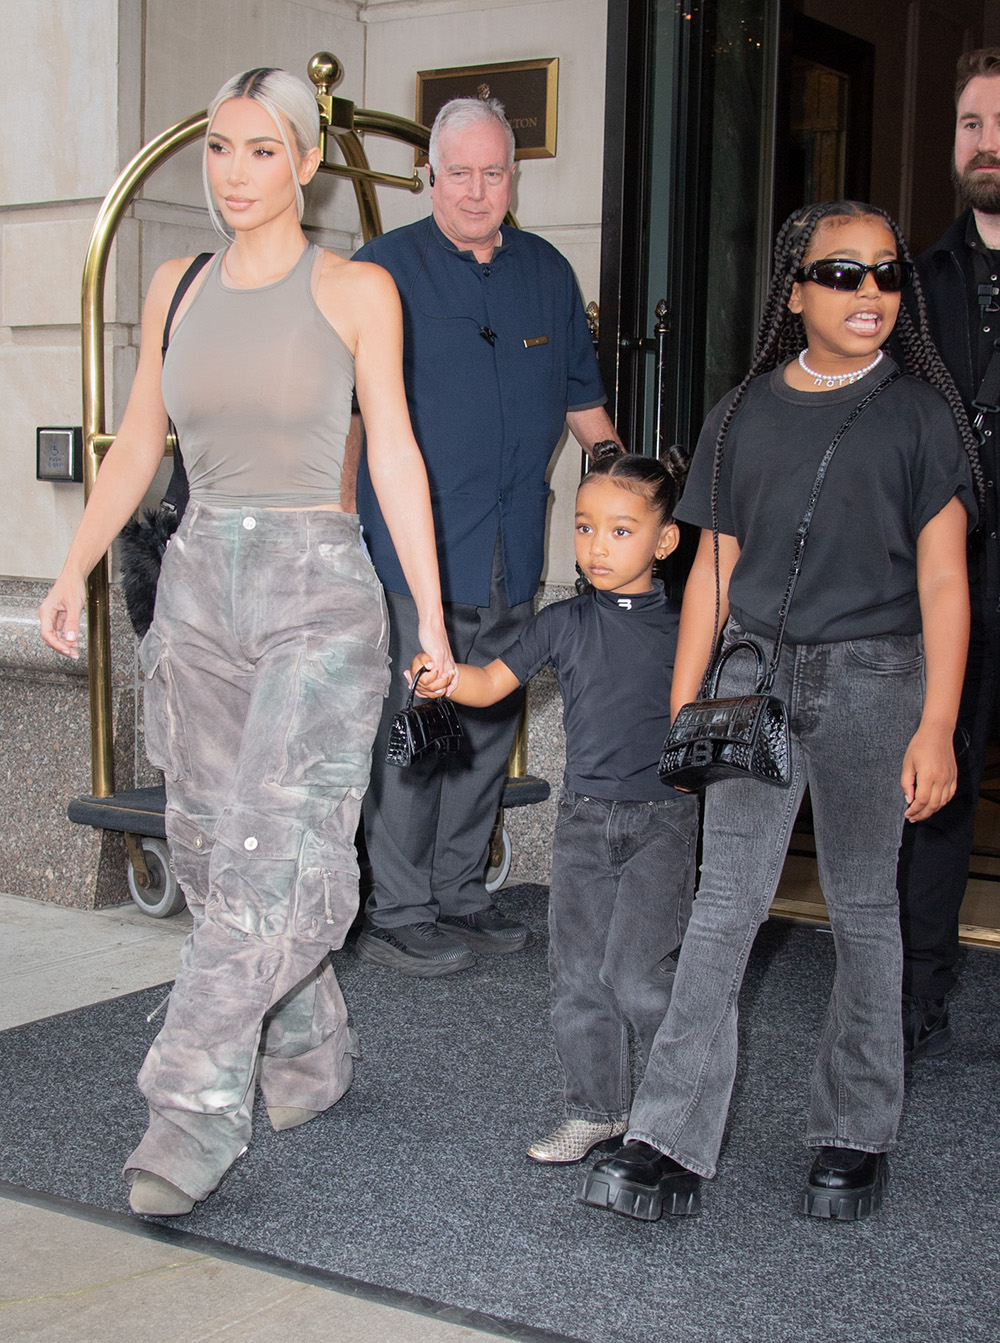 Kim Kardashian and daughters Chicago and North leave their New York hotel together. Pictured: Kim Kardashian, Chicago, North Ref: SPL5325871 120722 NON EXCLUSIVE Photo by : WavyPeter / SplashNews.com Splash News and Pictures USA: +1 310-525-5808 London: +44 (0)20 8126 1009 Berlin: +49 175 3764 166 photodesk@splashnews.com Global Rights